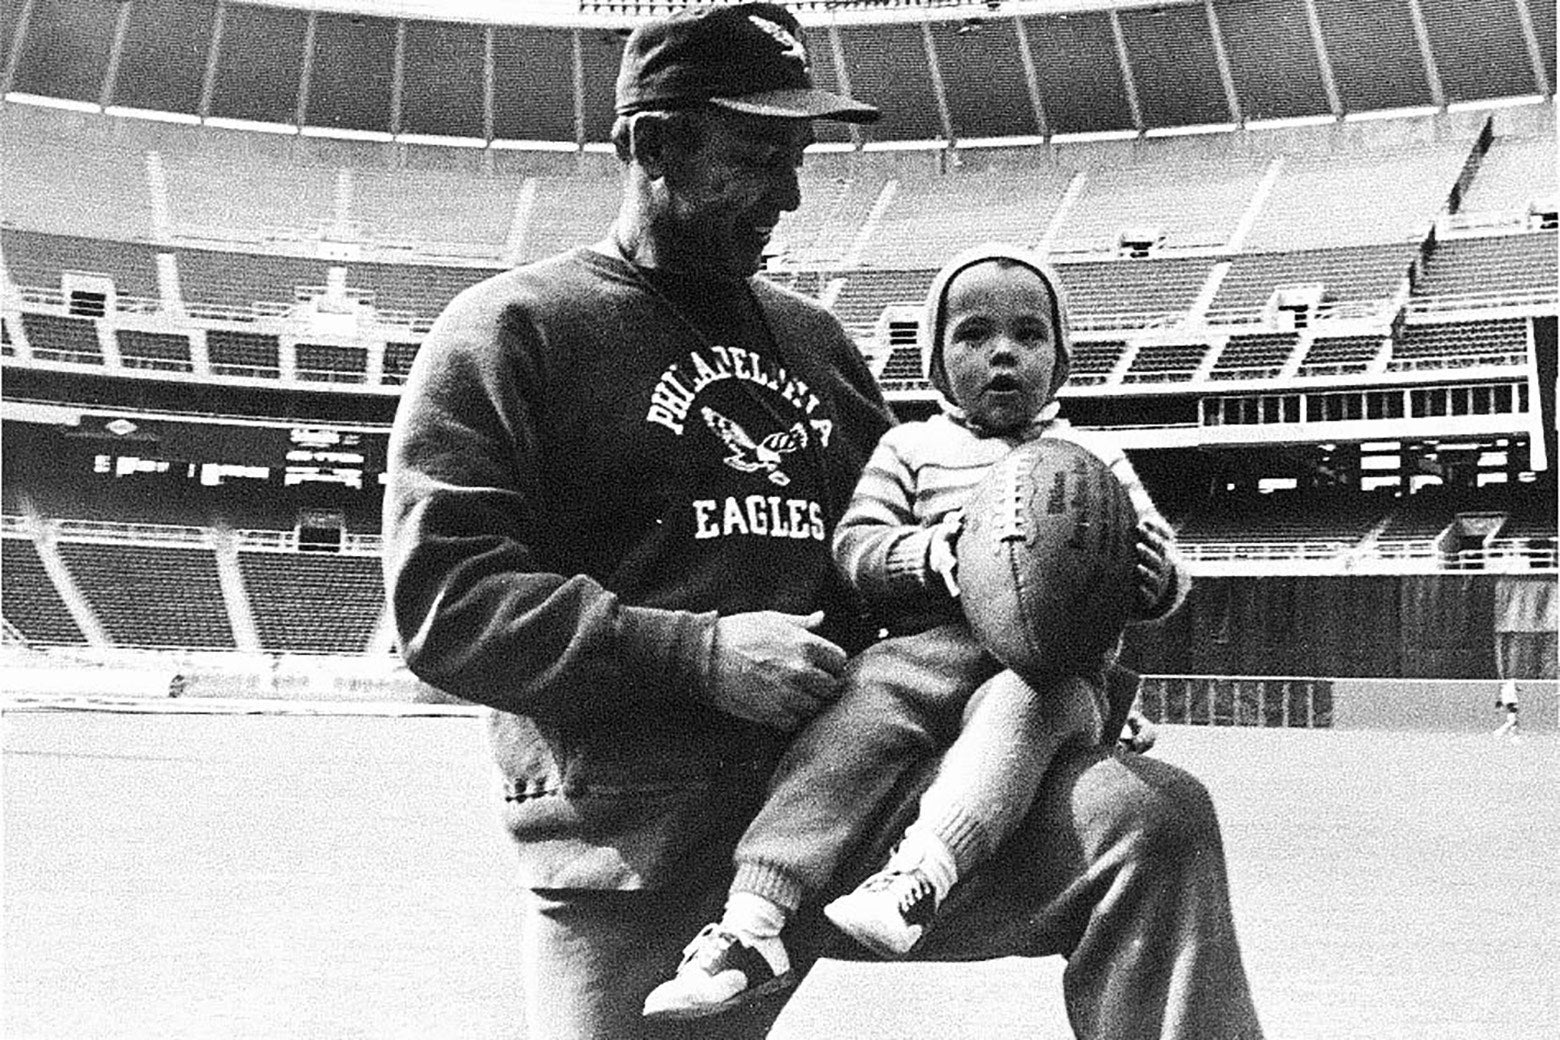 The Philadelphia Eagles fired my dad in 1971. I'm just starting to